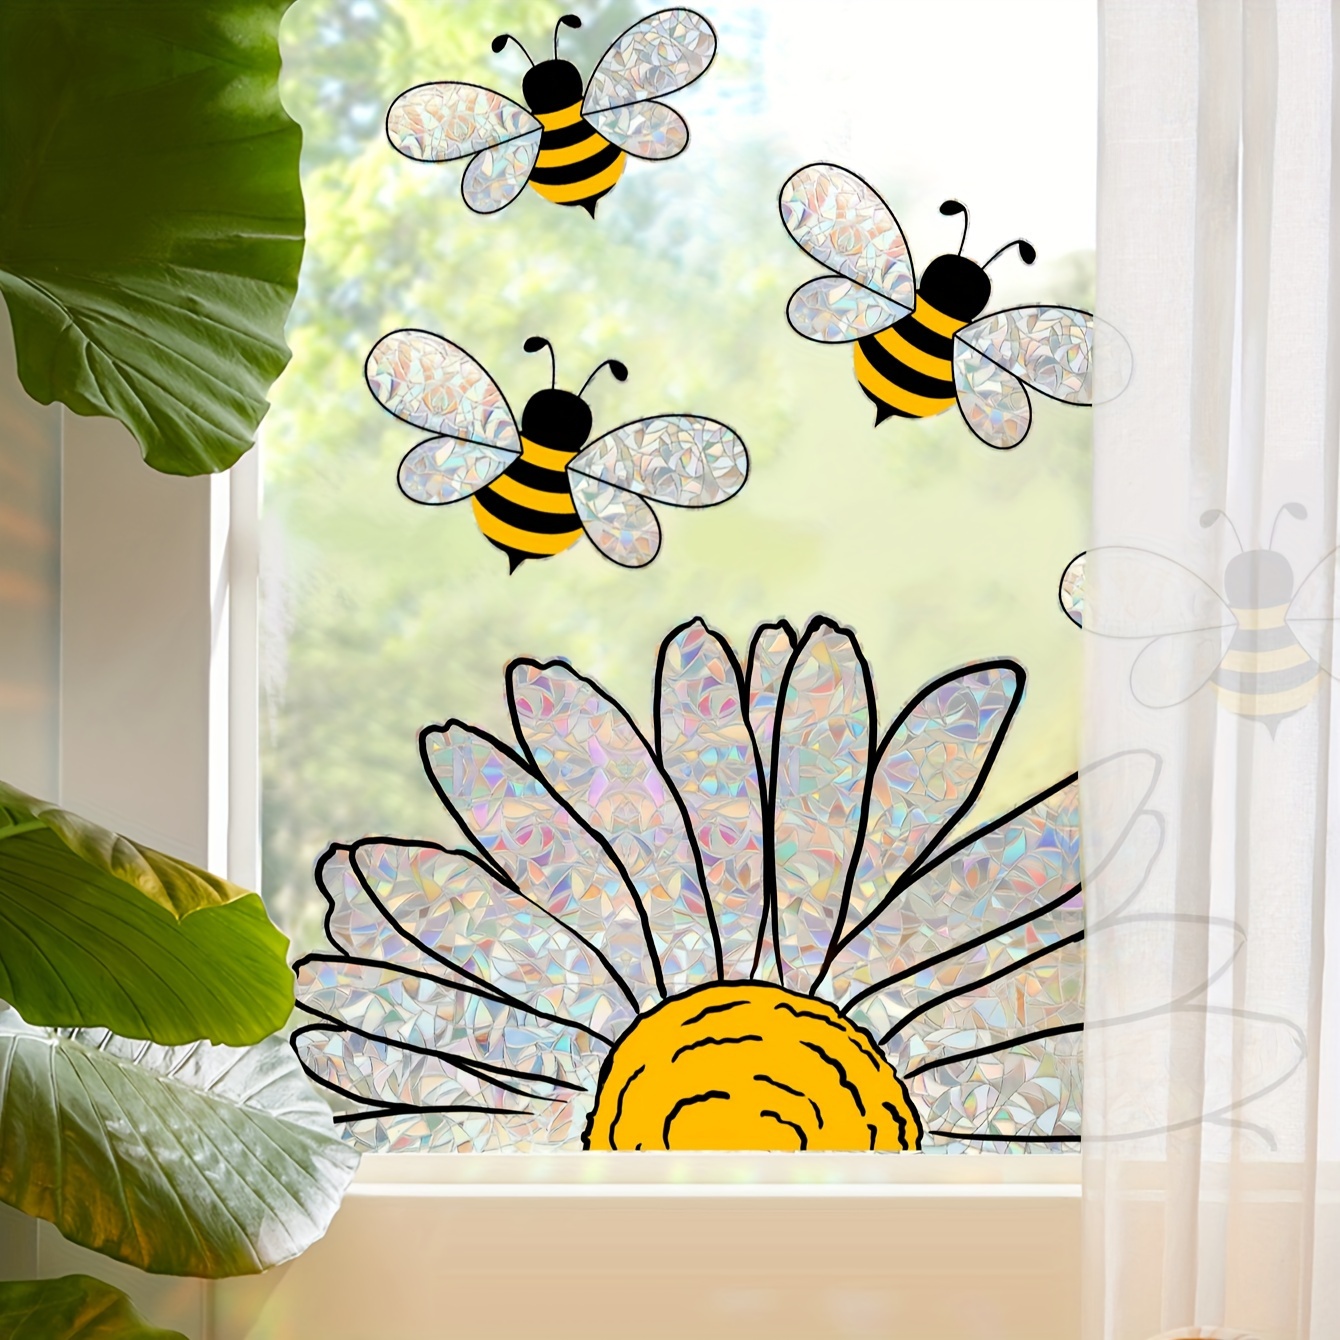 

1 Set Sunflower & Bee Stained Glass Effect Static-cling Window Decals, Colorful Home Decor, Non-adhesive Vinyl Plastic For Window Display, Aesthetic Home Decoration, Room Decor, Beautify Your Home